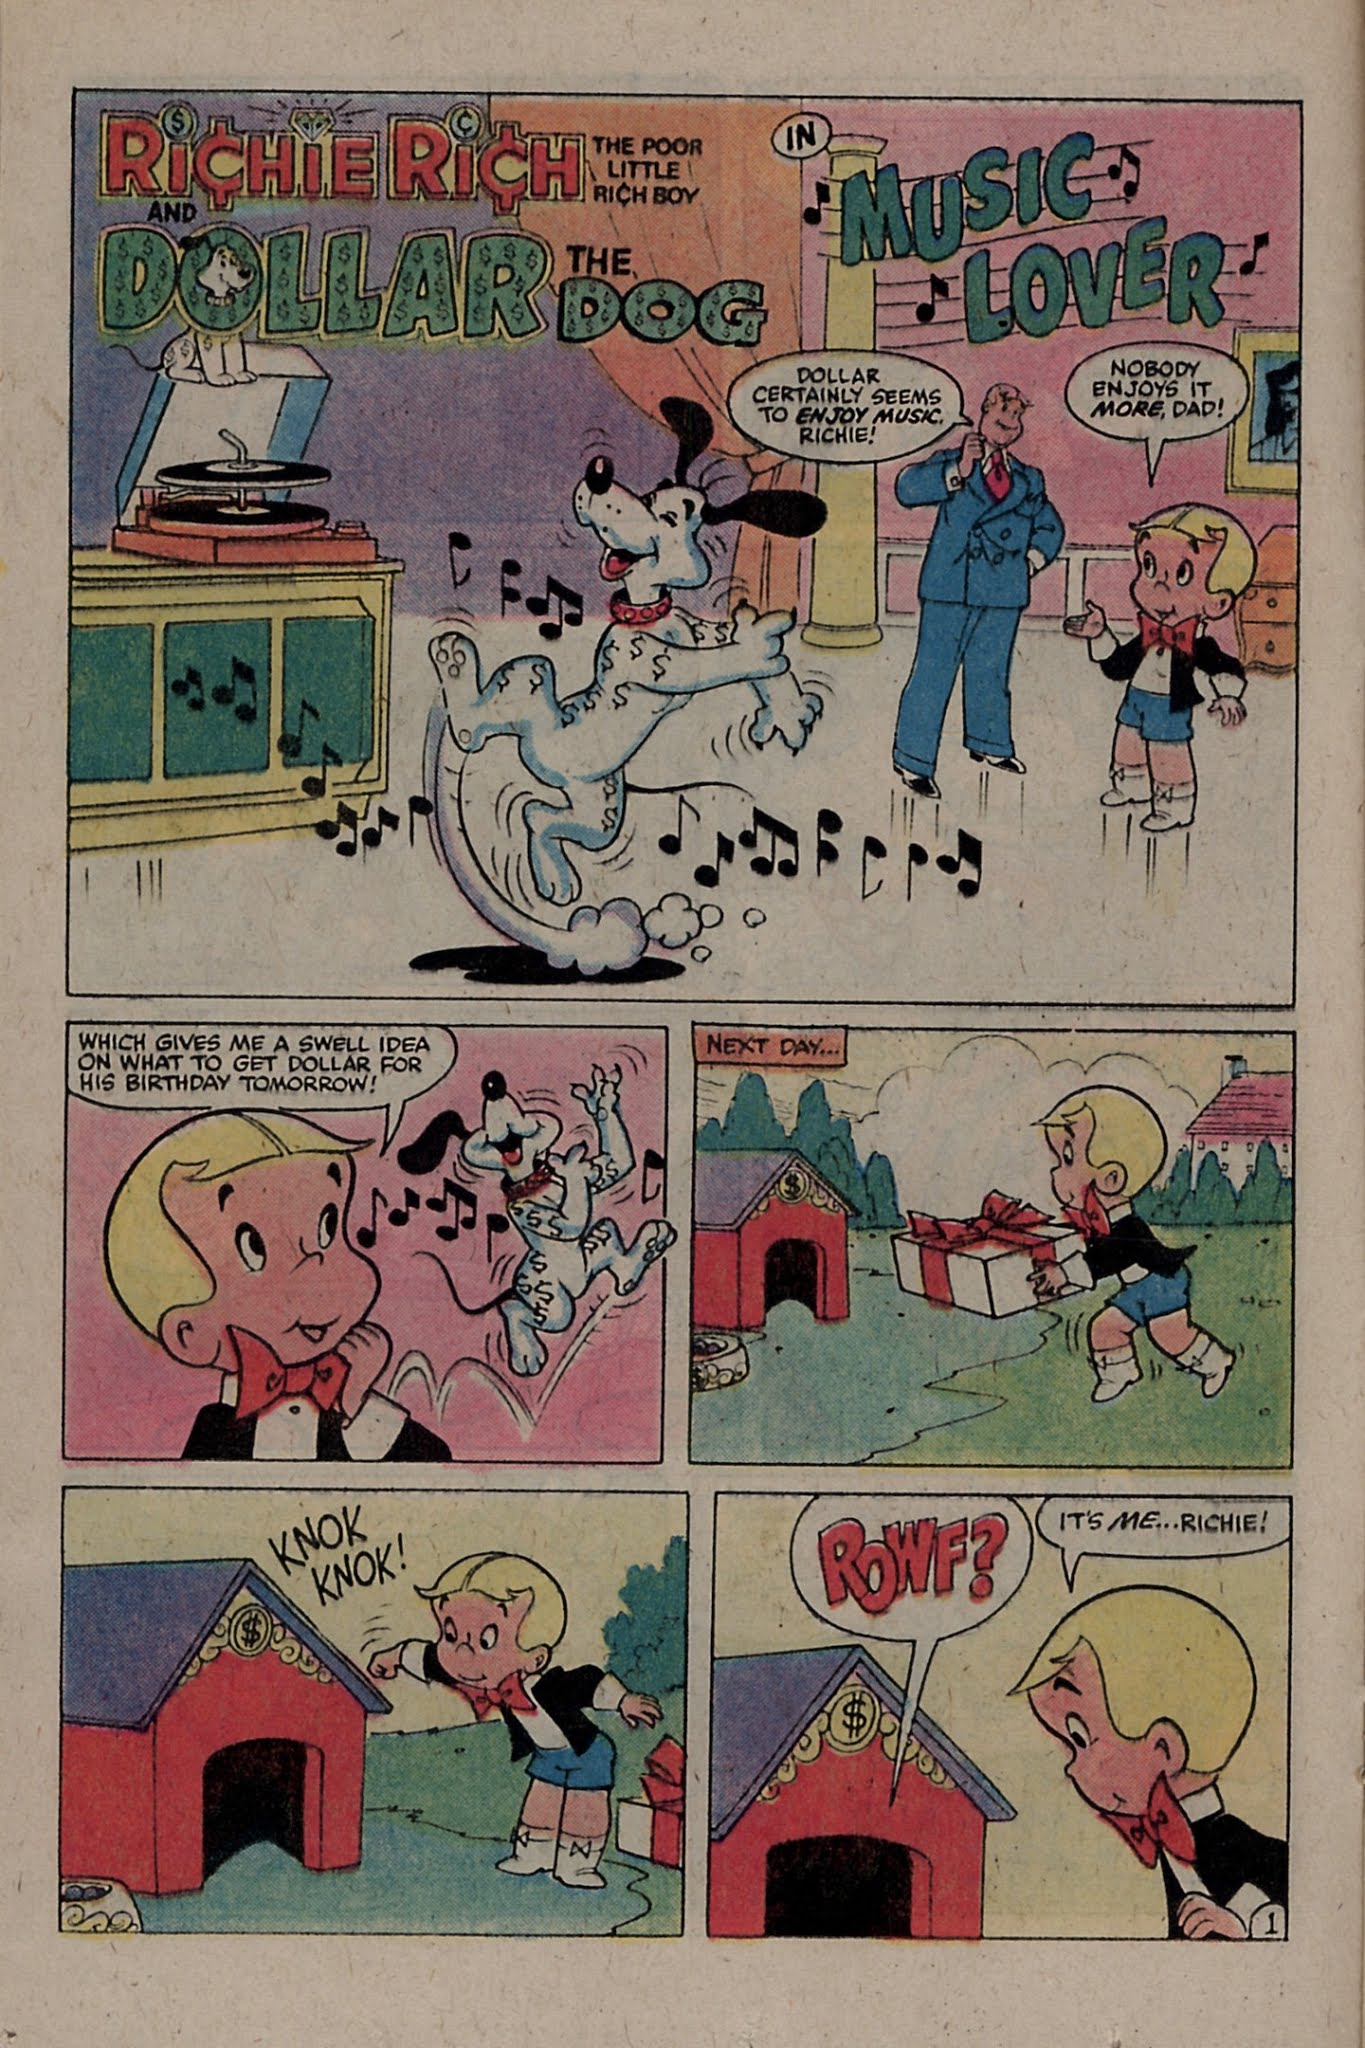 Read online Richie Rich & Dollar the Dog comic -  Issue #7 - 24